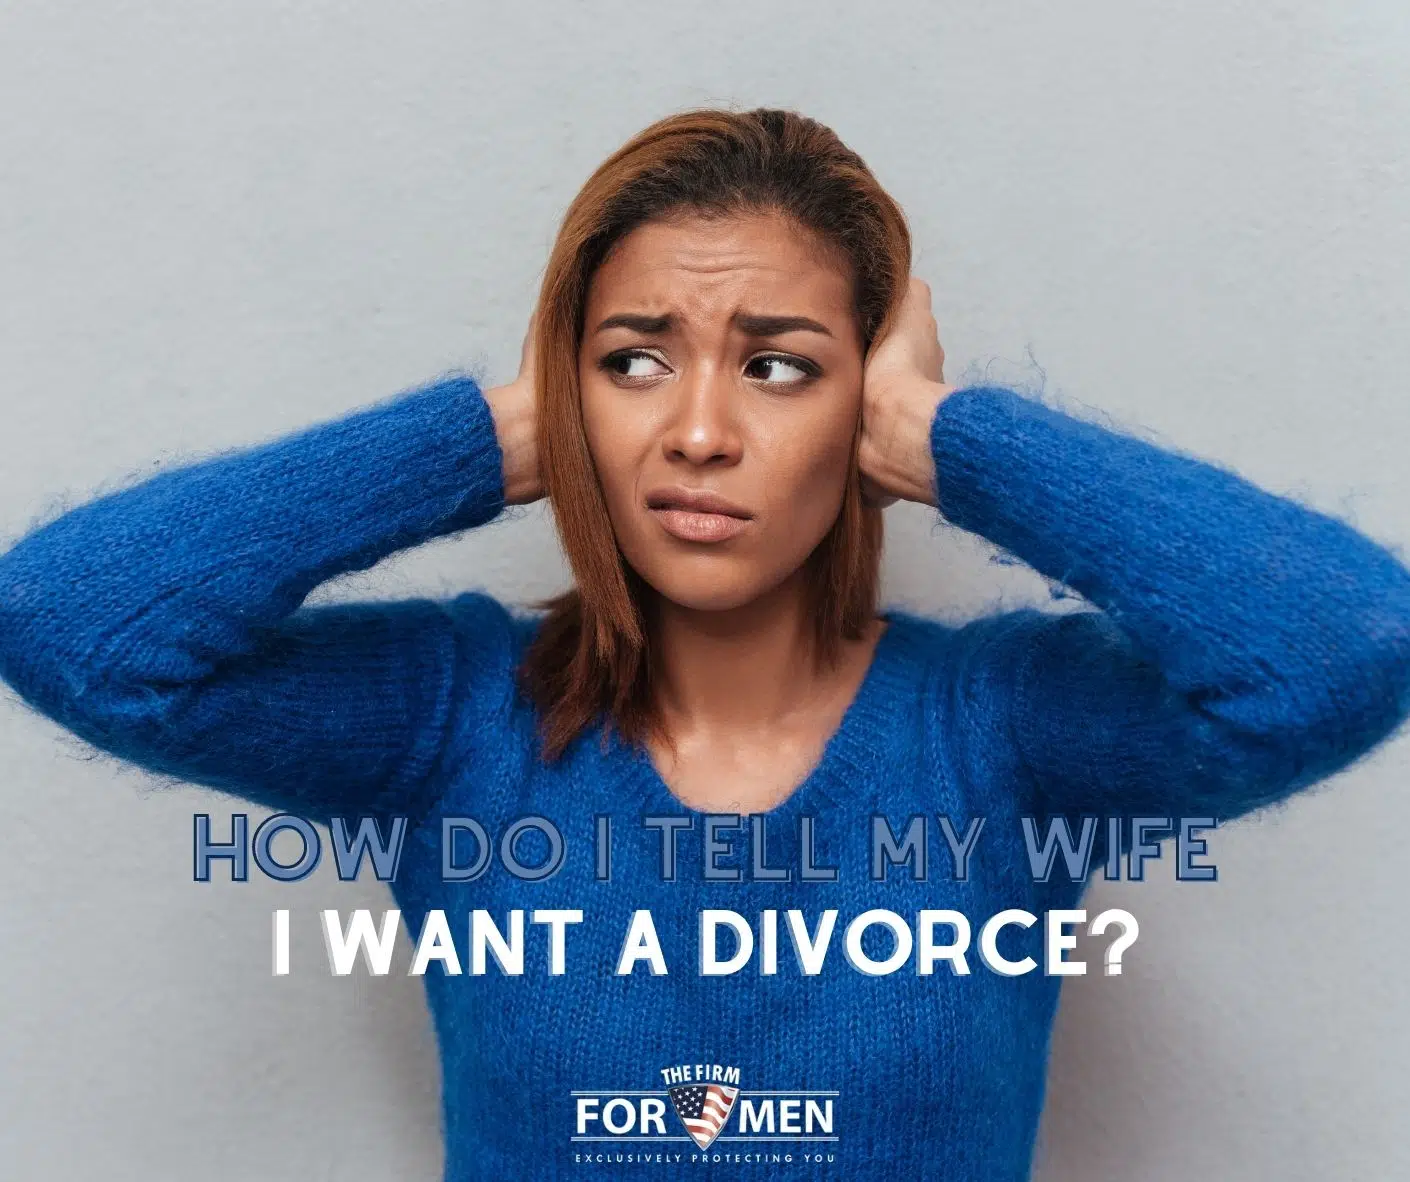 How Do I Tell My Wife I Want a Divorce